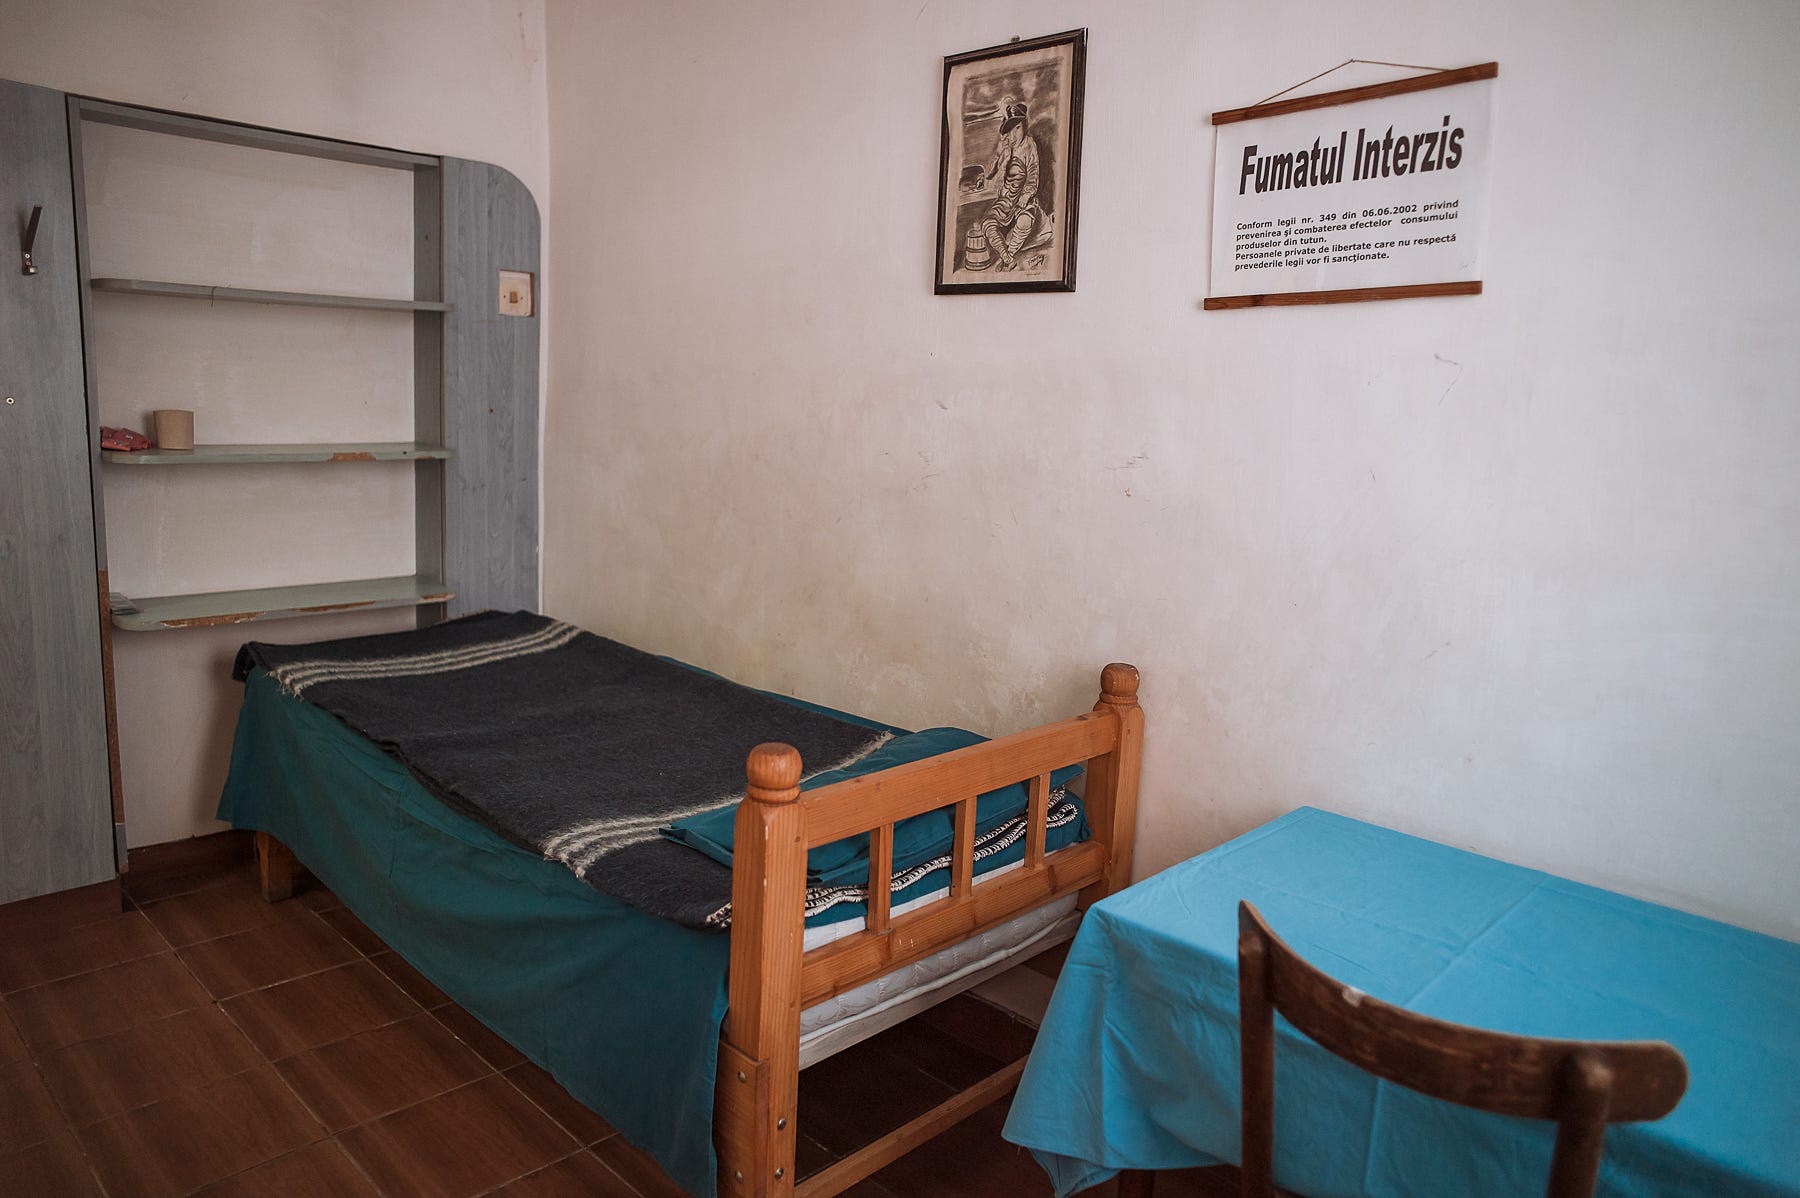 Sex Cells Inside The Conjugal Visit Rooms Of Romania S Prisons